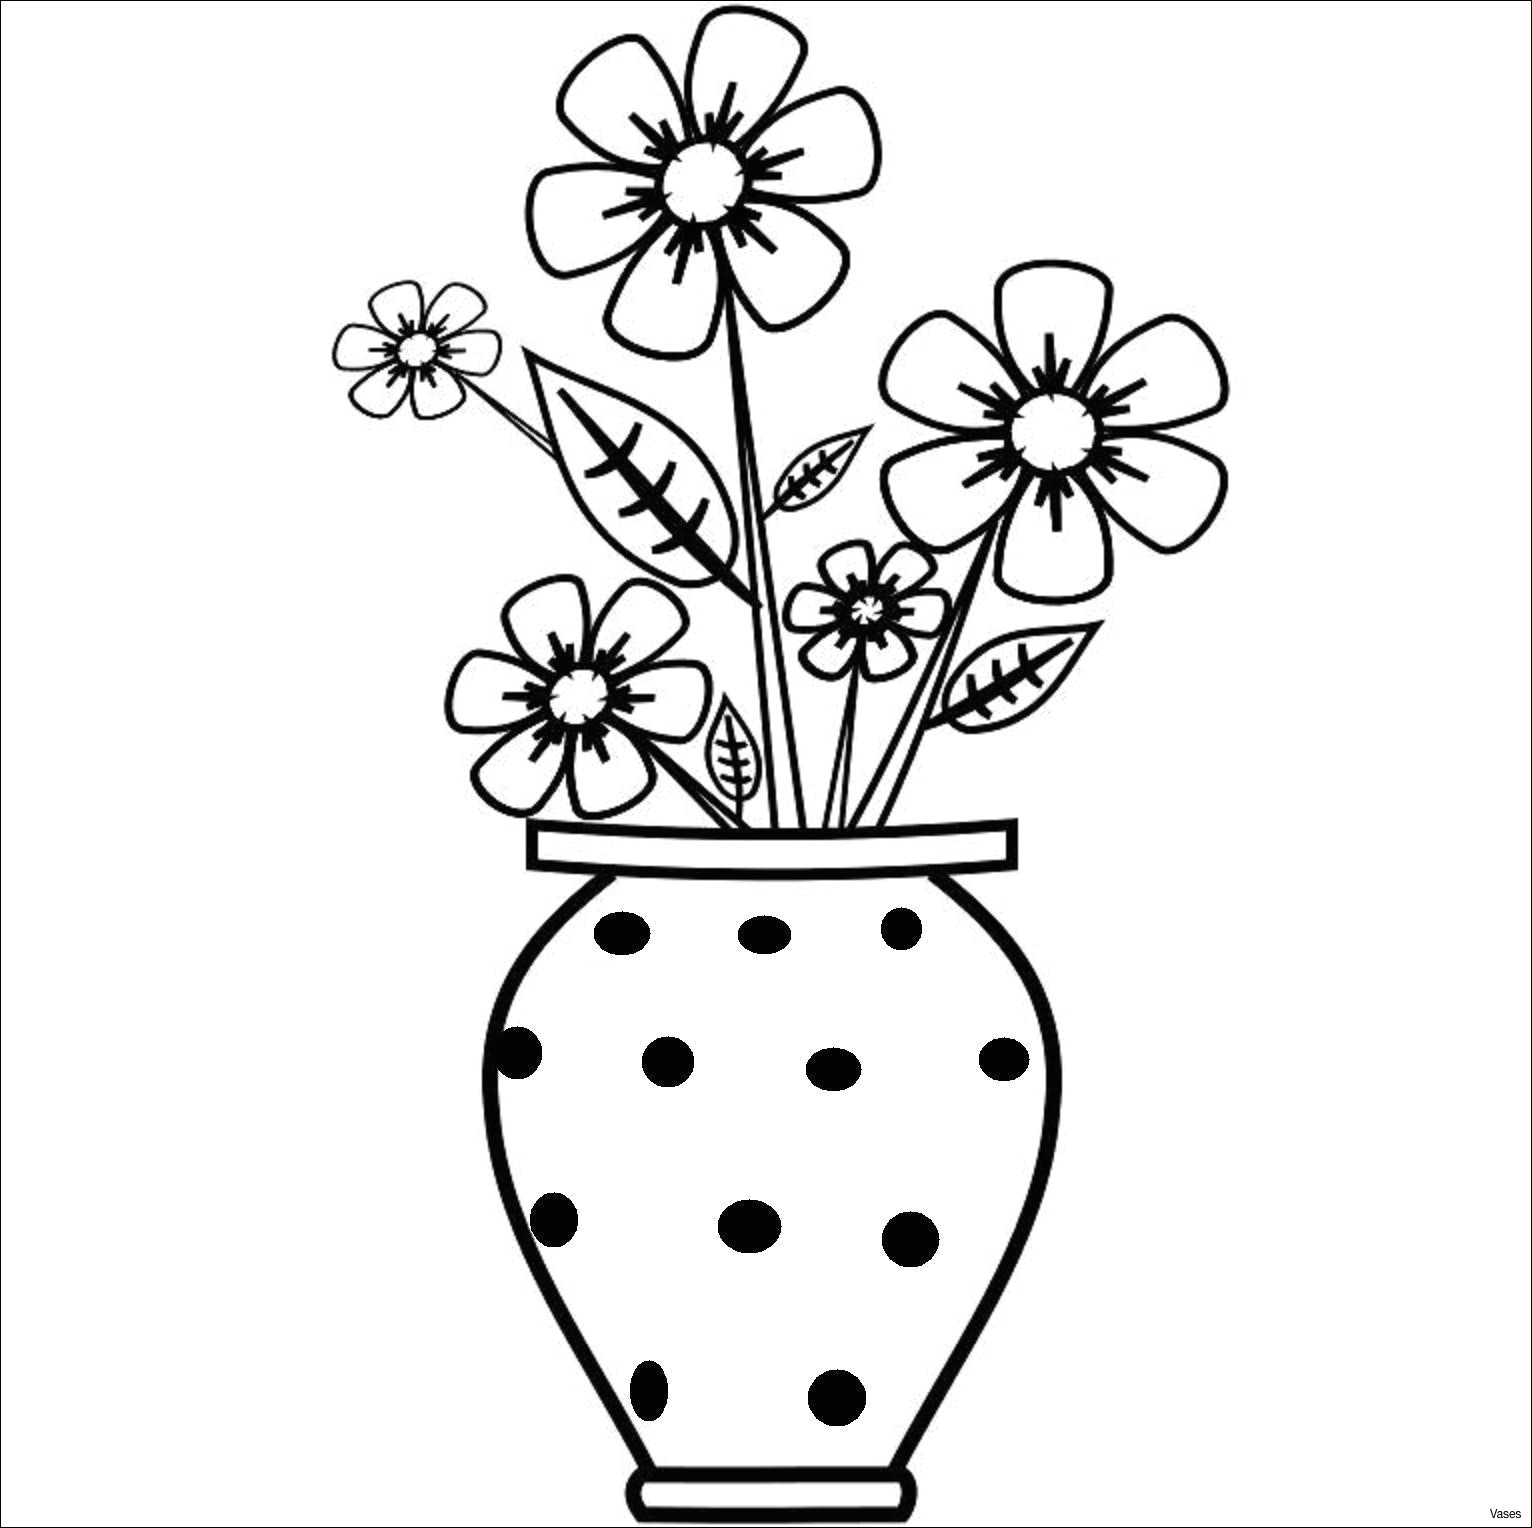 Drawing Flowers In Perspective Images Of Easy Drawings Vase Art Drawings How to Draw A Vase Step 2h